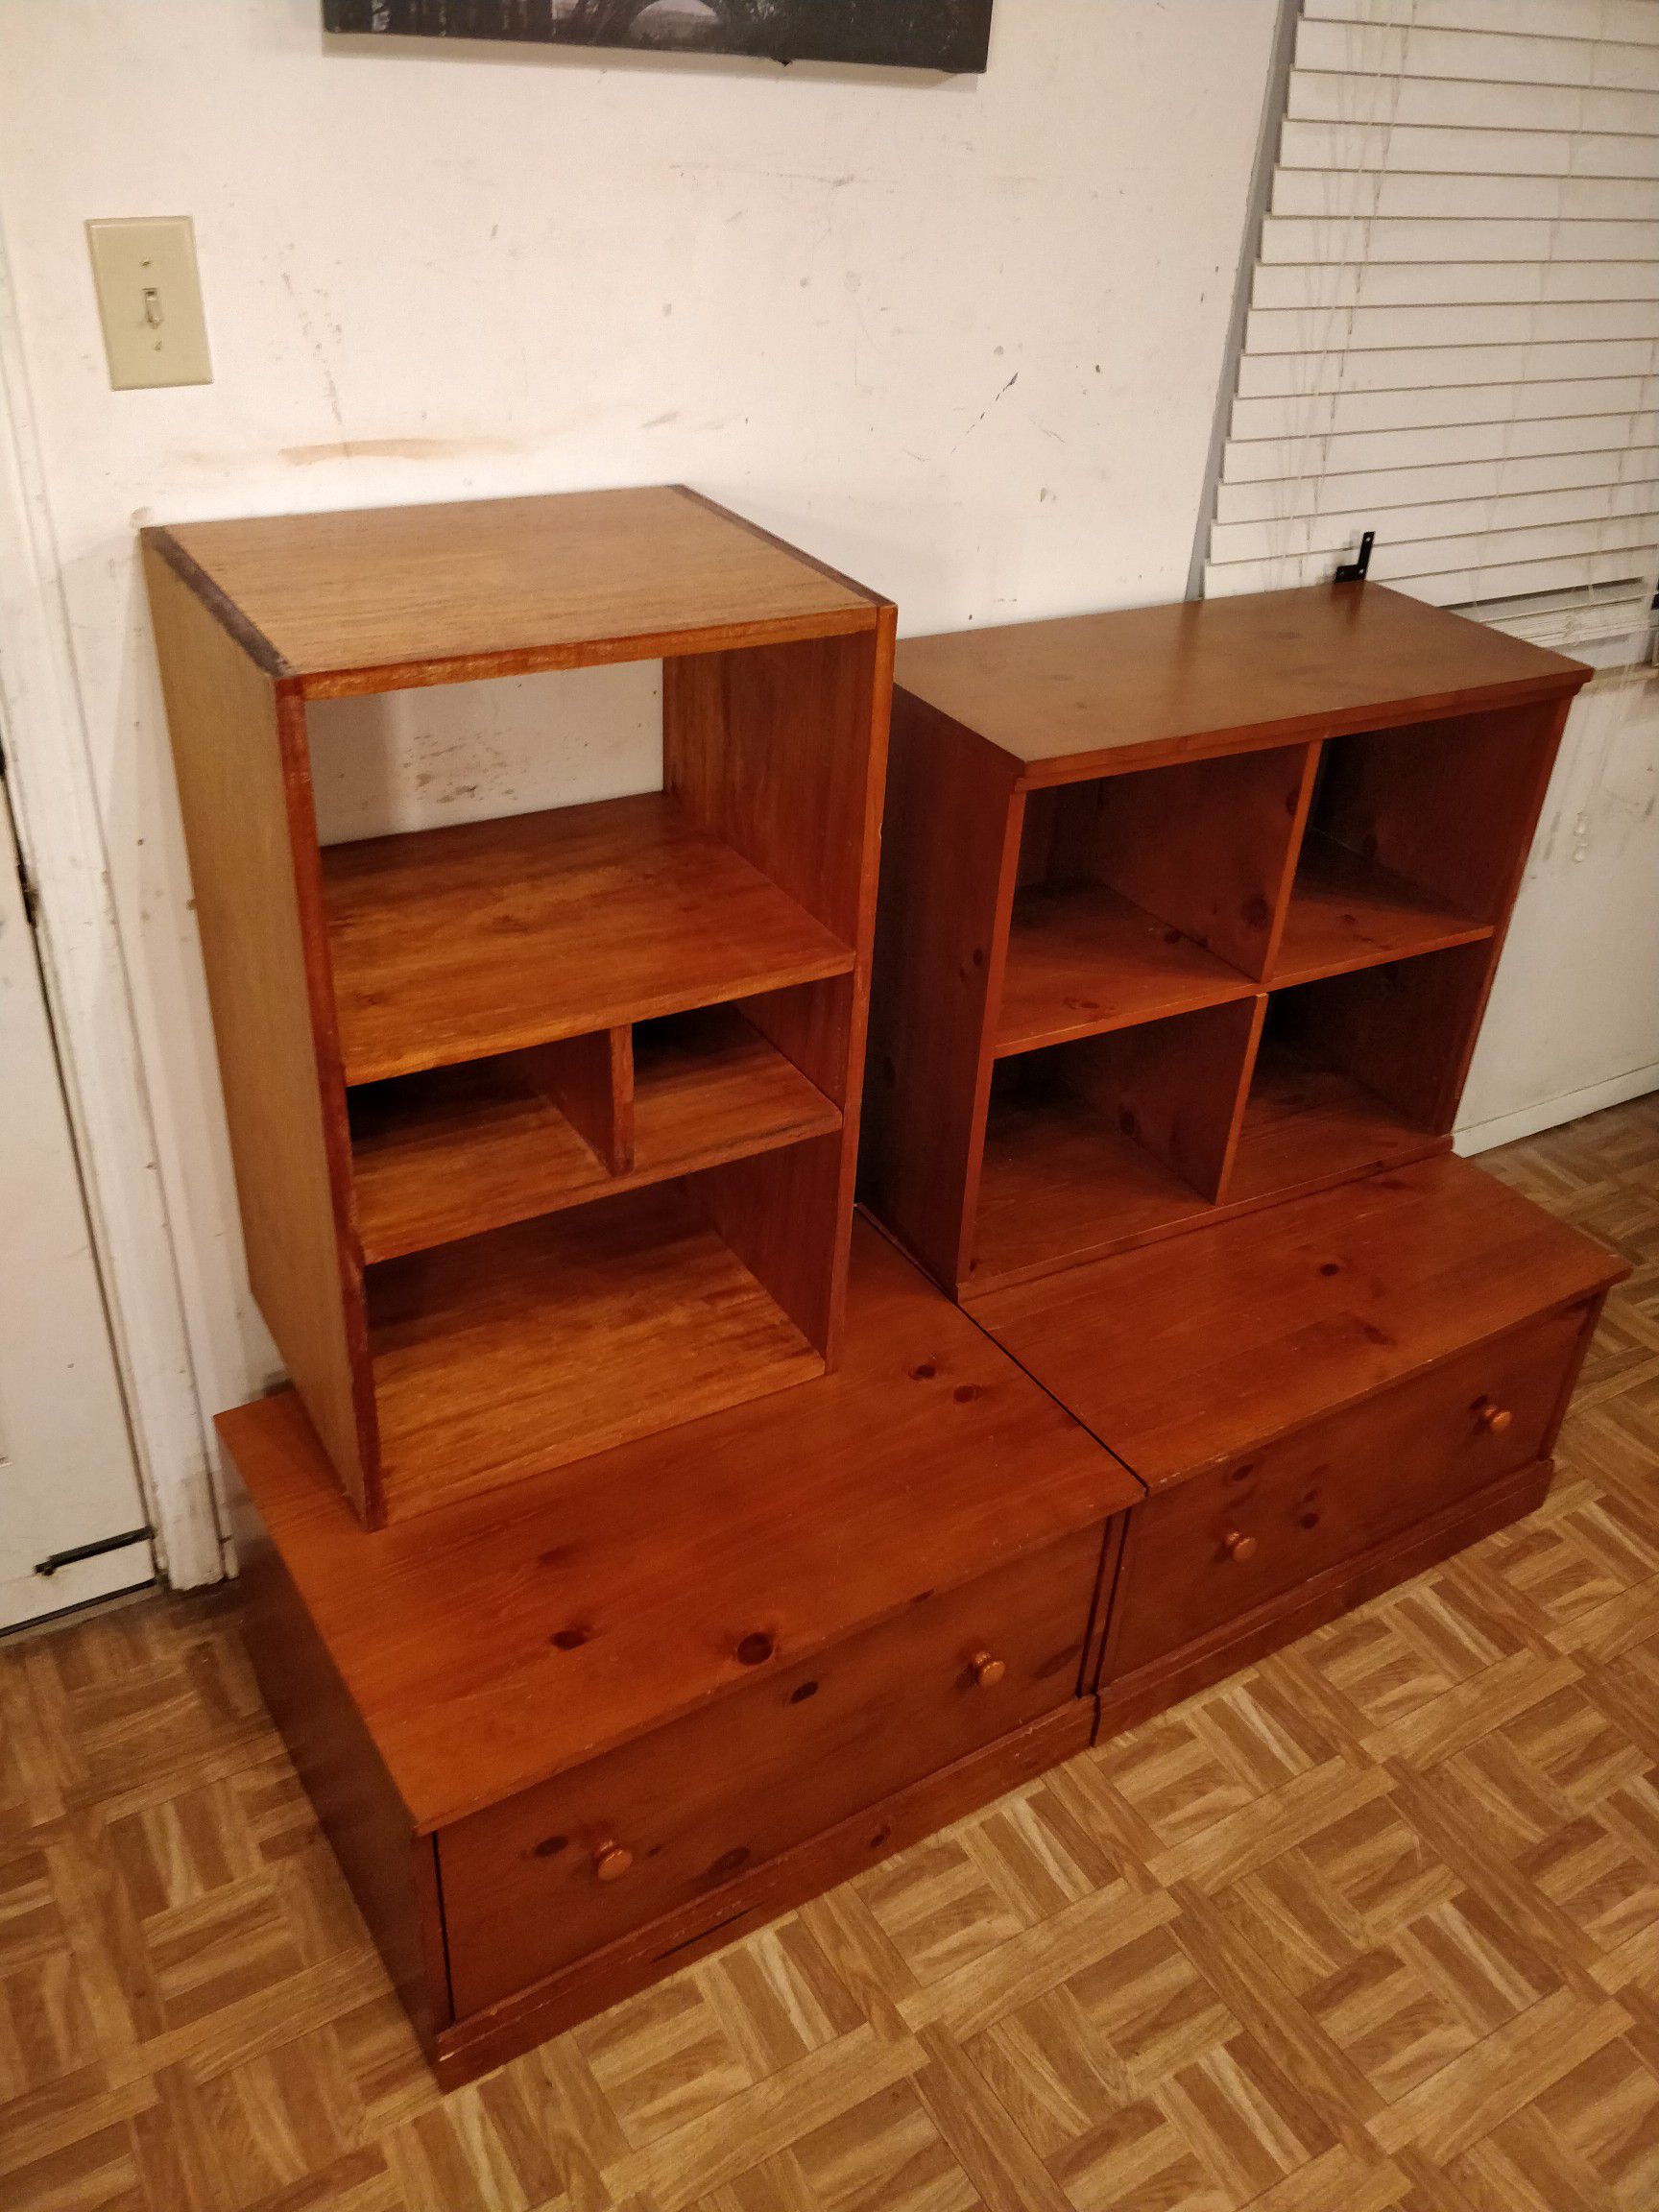 Solid wood 2 bench &2 shelves with big drawers in good condition all drawers working well, you can attach the shelves to wall, Driveway pickup. Each"